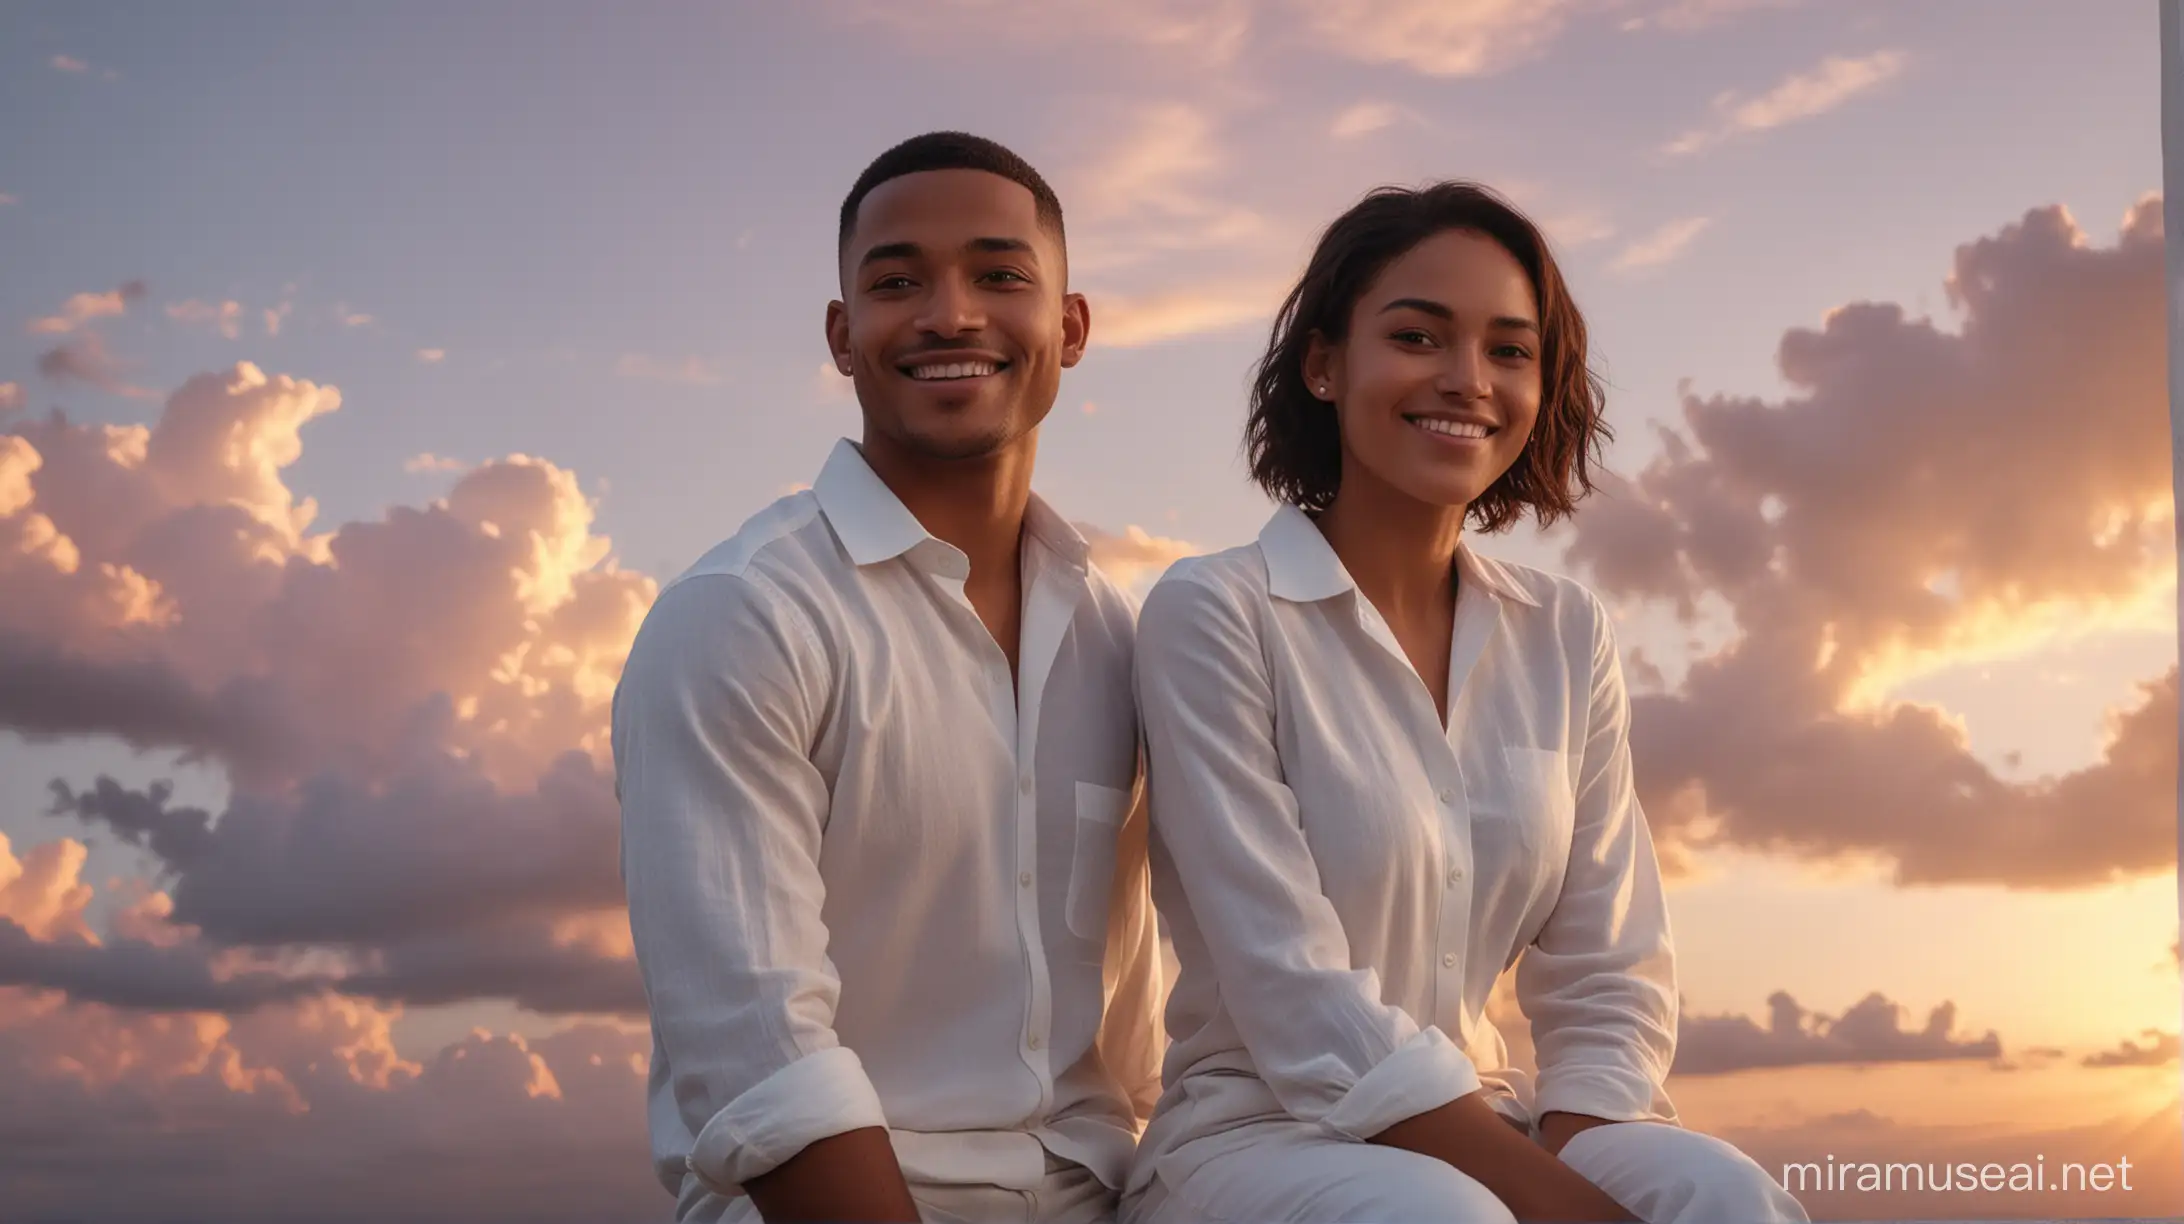 Young African American Businessman and Colombian Woman on a Cloud at Sunset